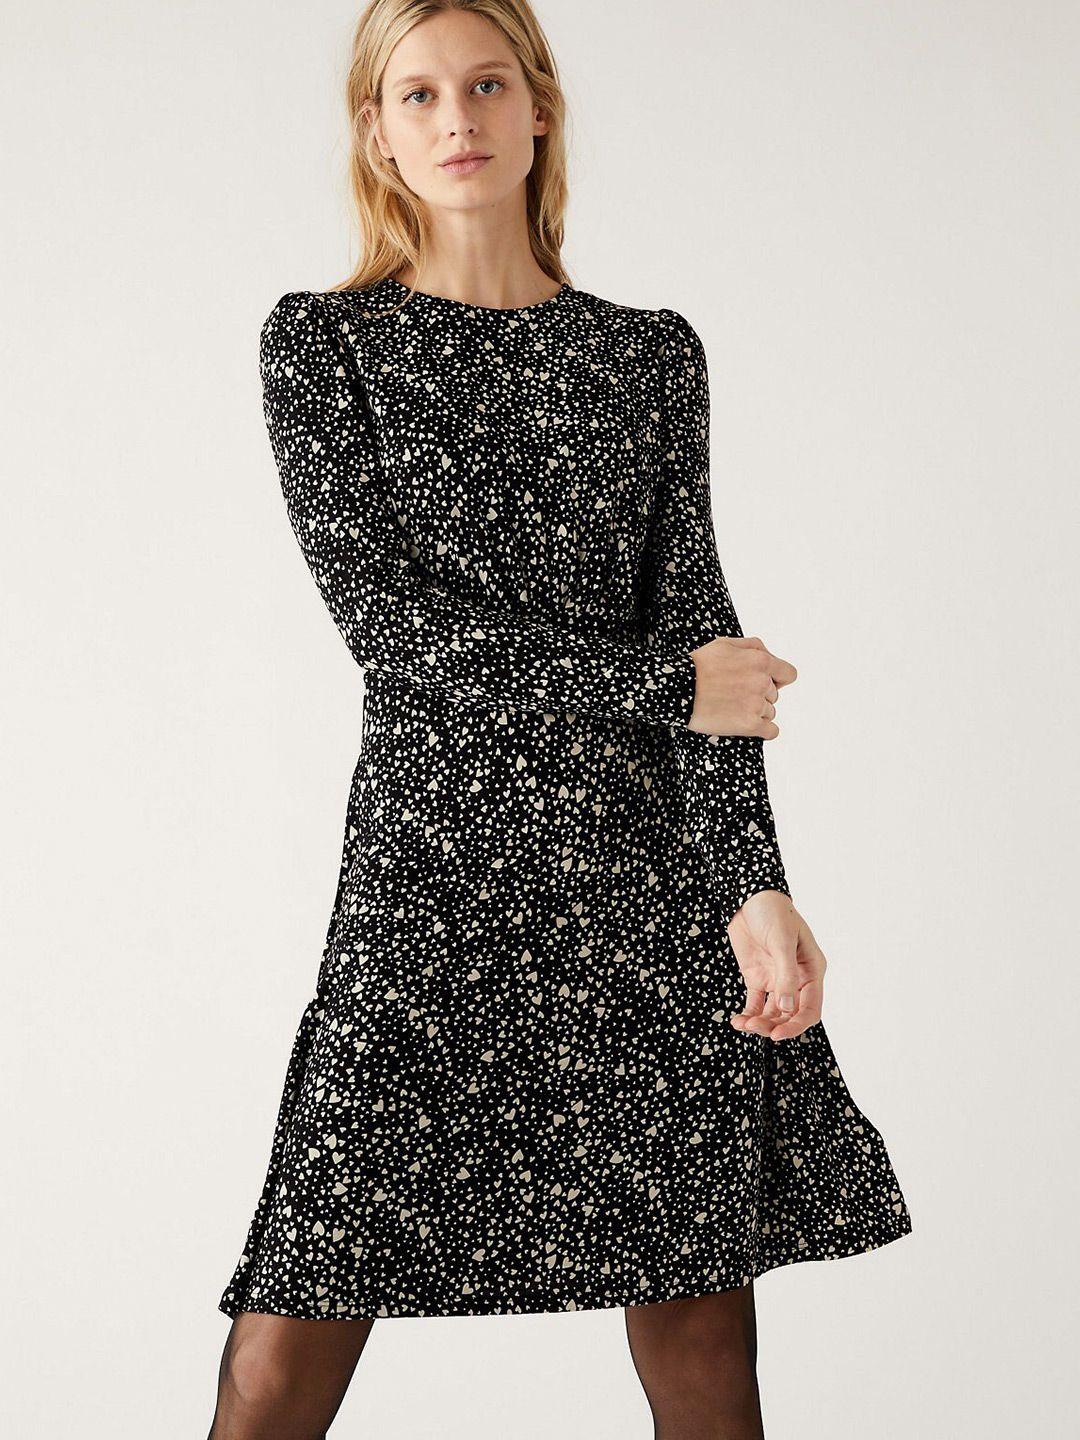 marks & spencer conversational printed puff sleeves a-line dress